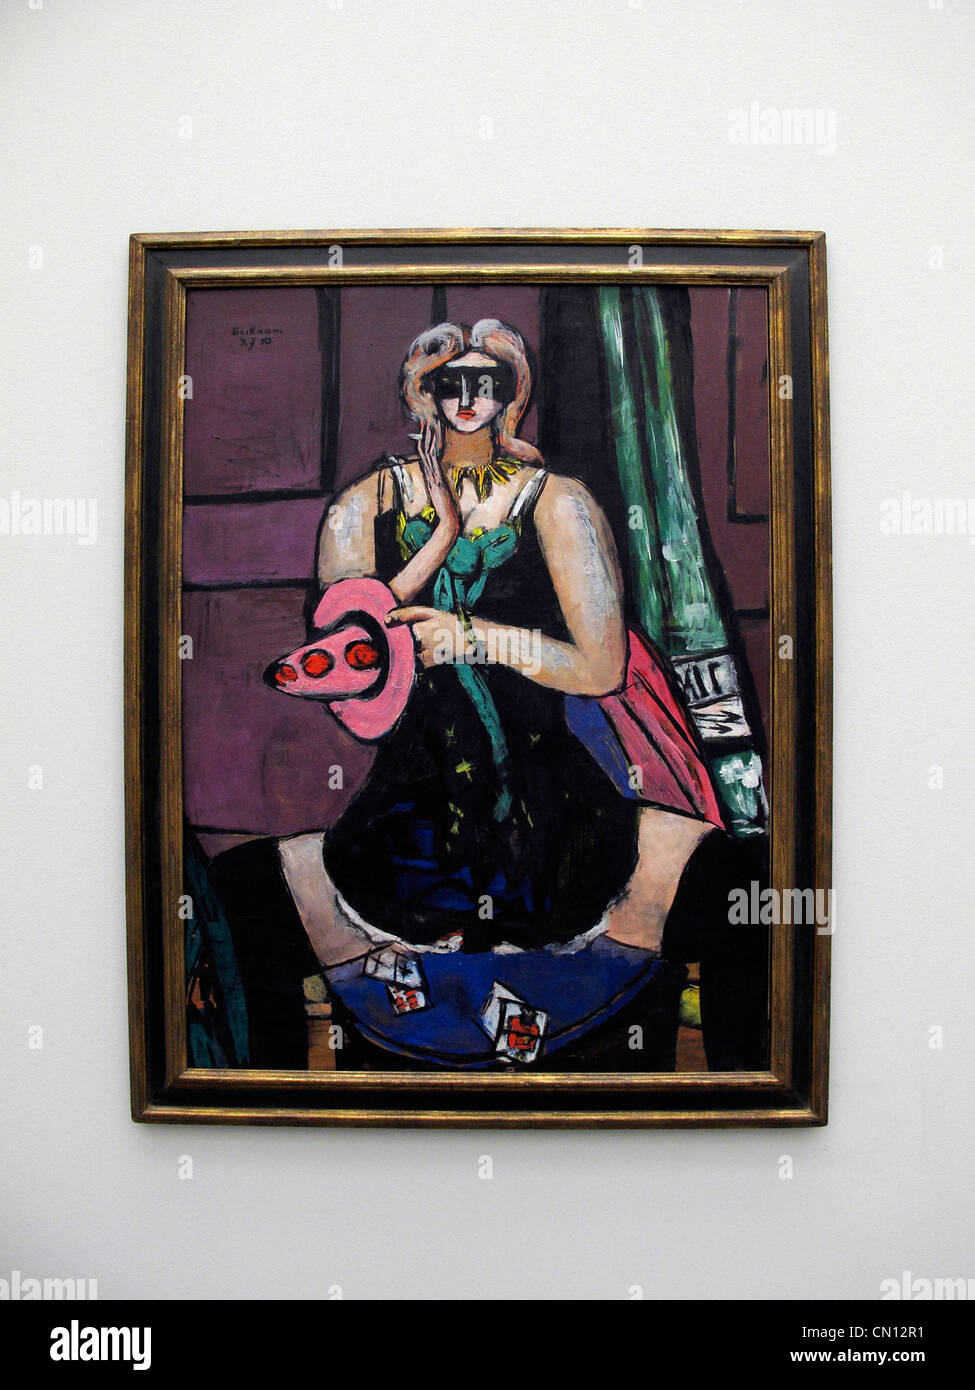 Max Beckmann Carnival High Resolution Stock Photography and Images - Alamy